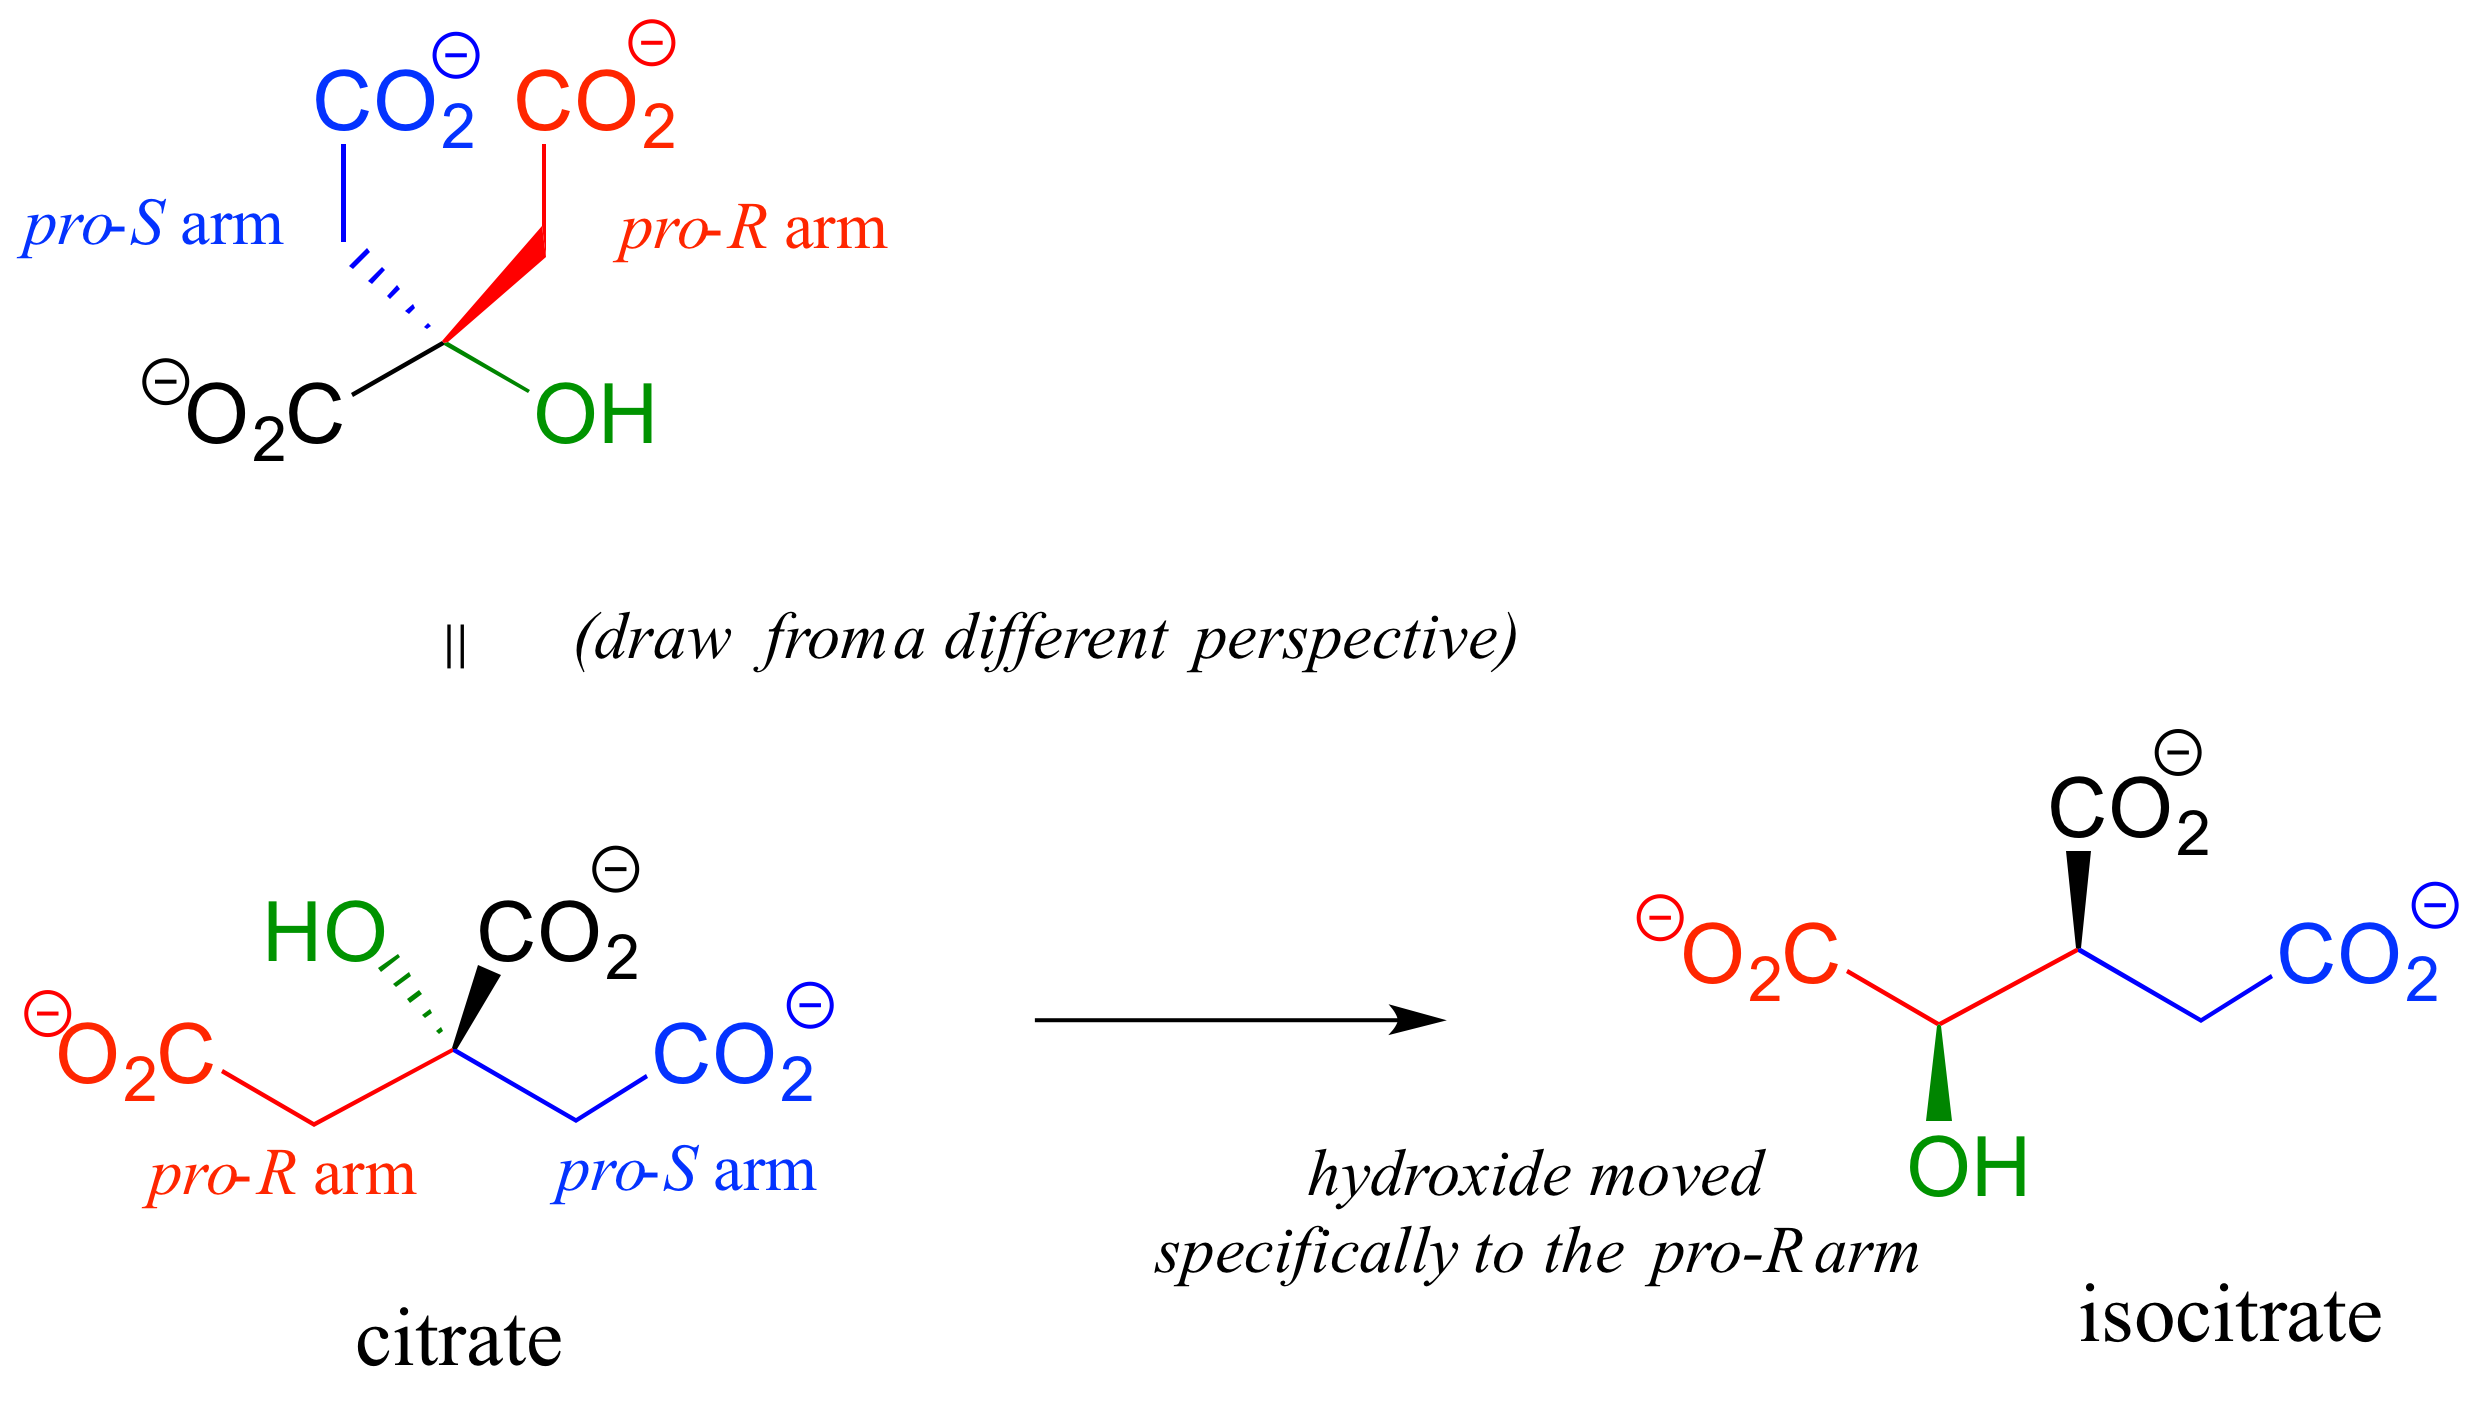 Citrate molecule with hydroxide on carbon 3 (carbon that connects pro-R arm and pro-S arm). Equal sign towards citrate molecule drawn from a different perspective. Arrow from citrate to isocitrate. Text: hydroxide moved specifically to the pro-R arm.